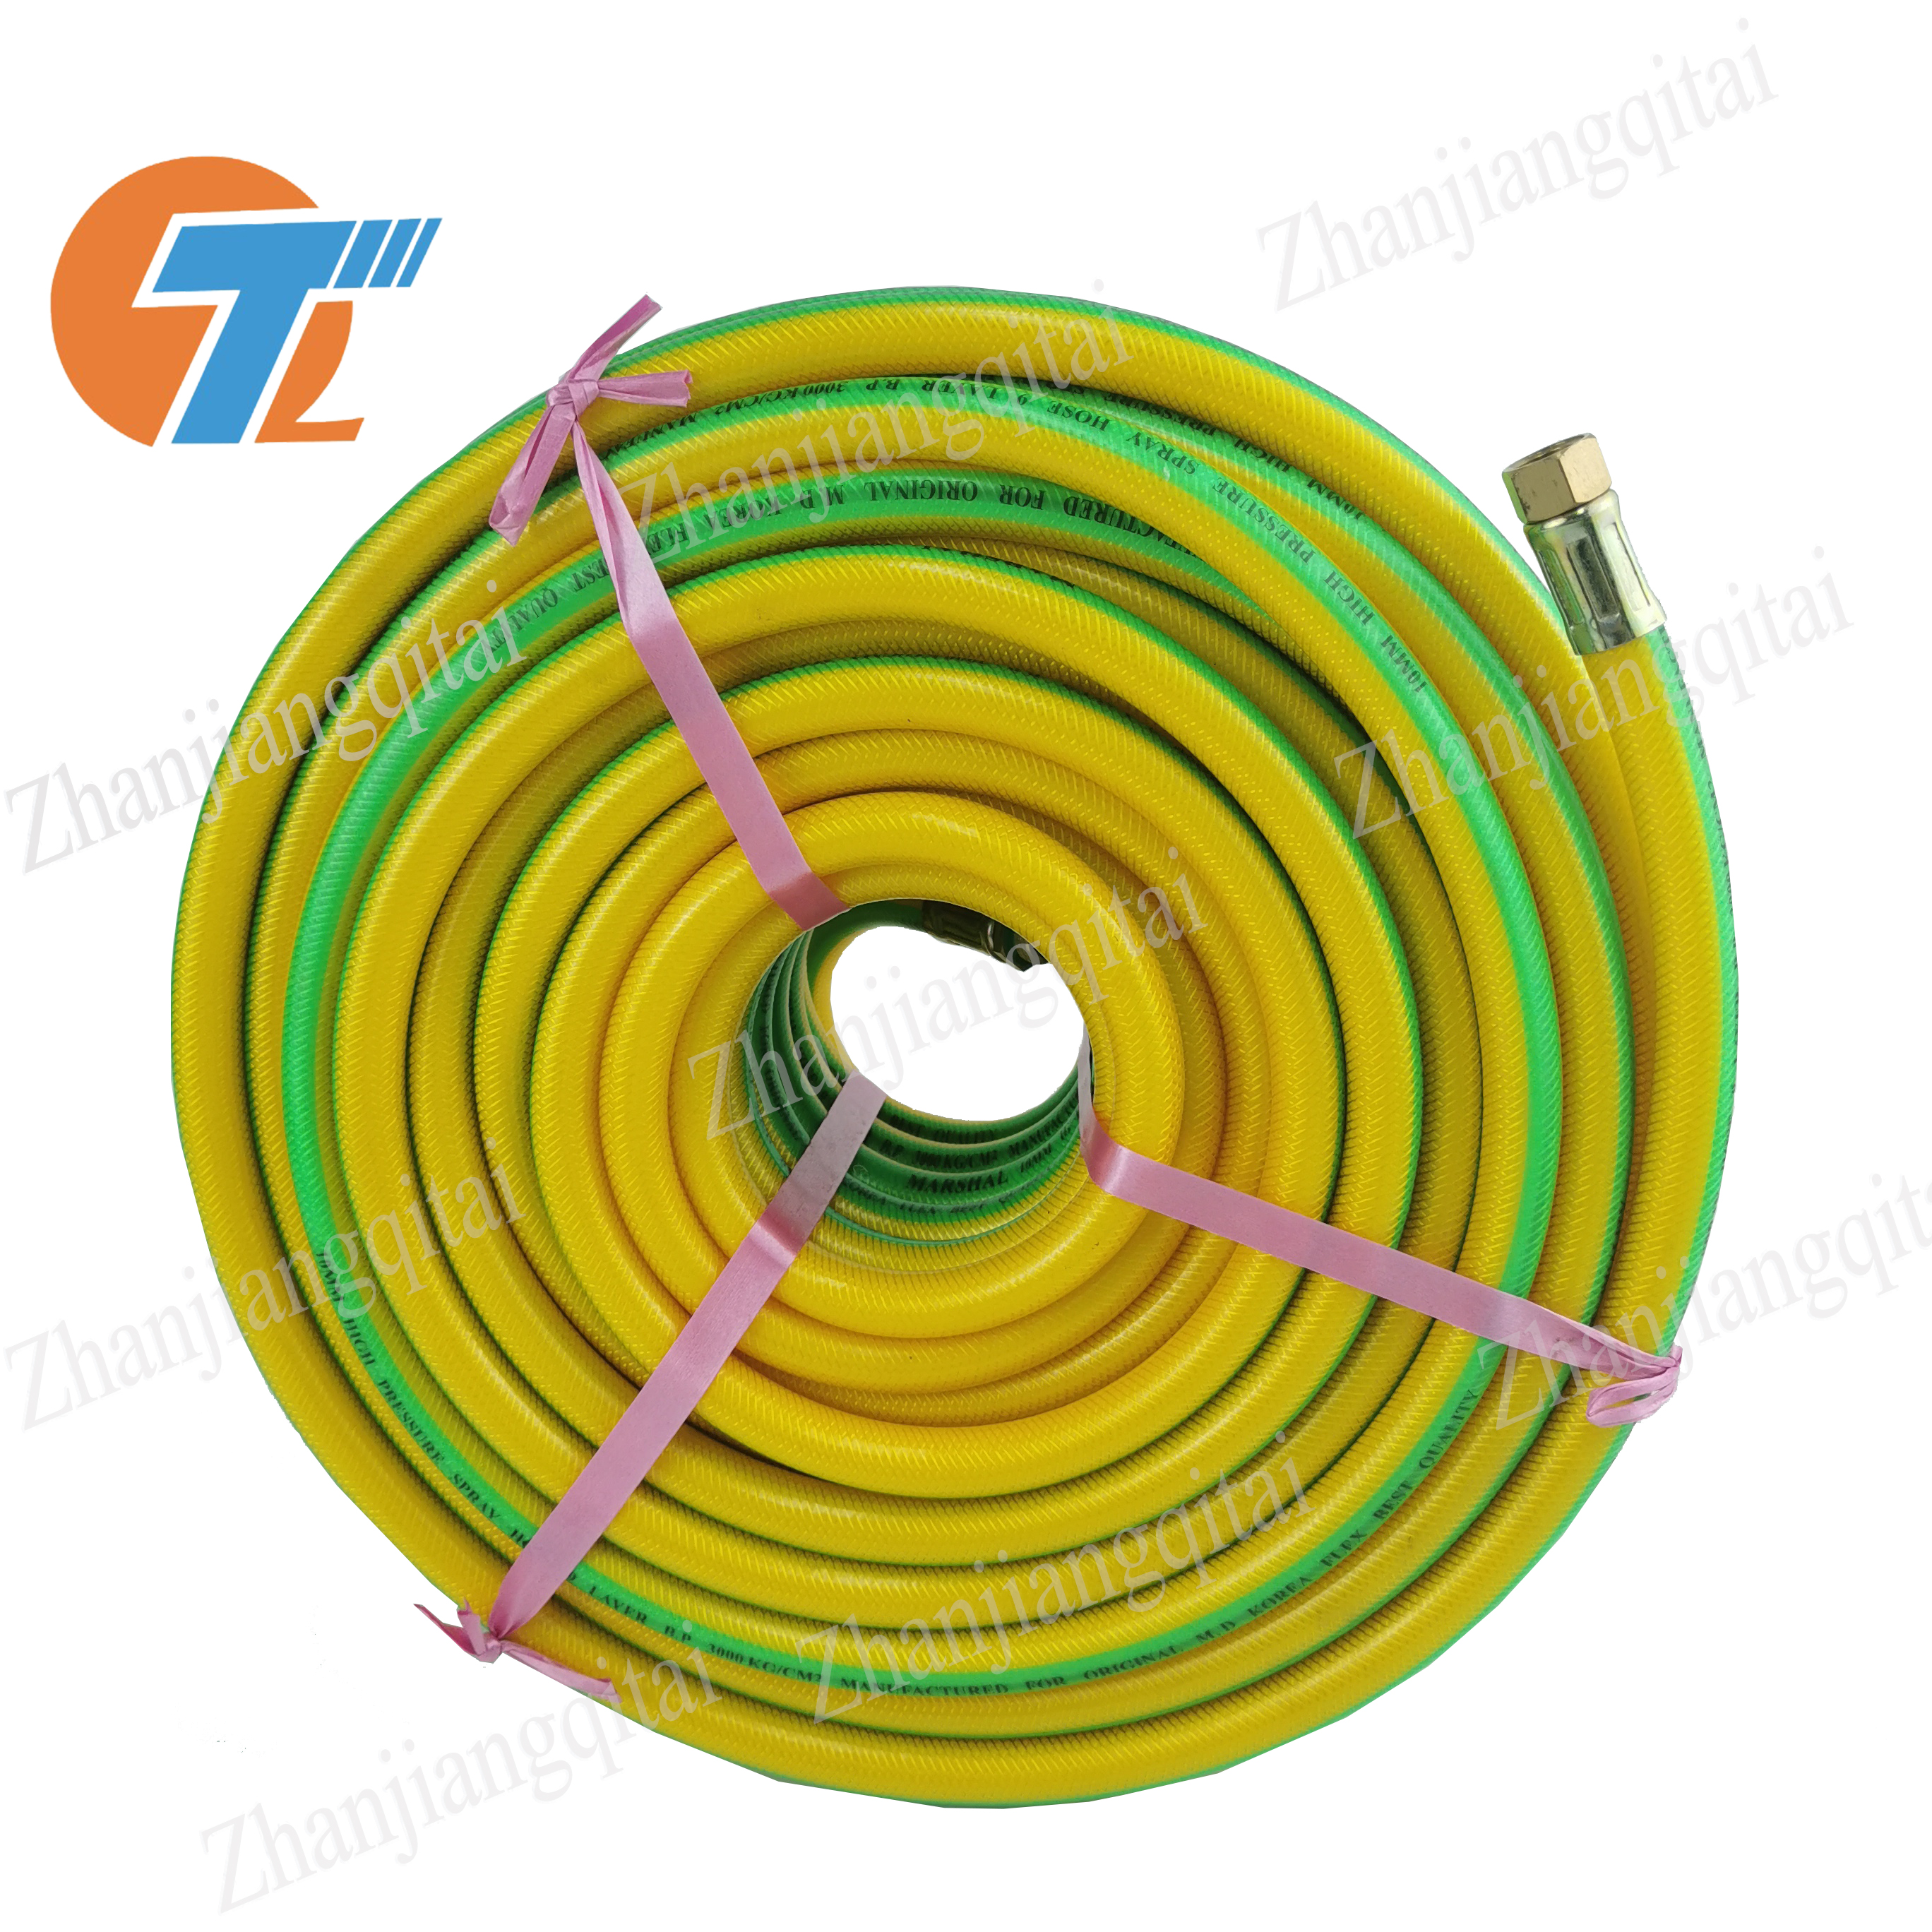 5layers agriculture spray hose 